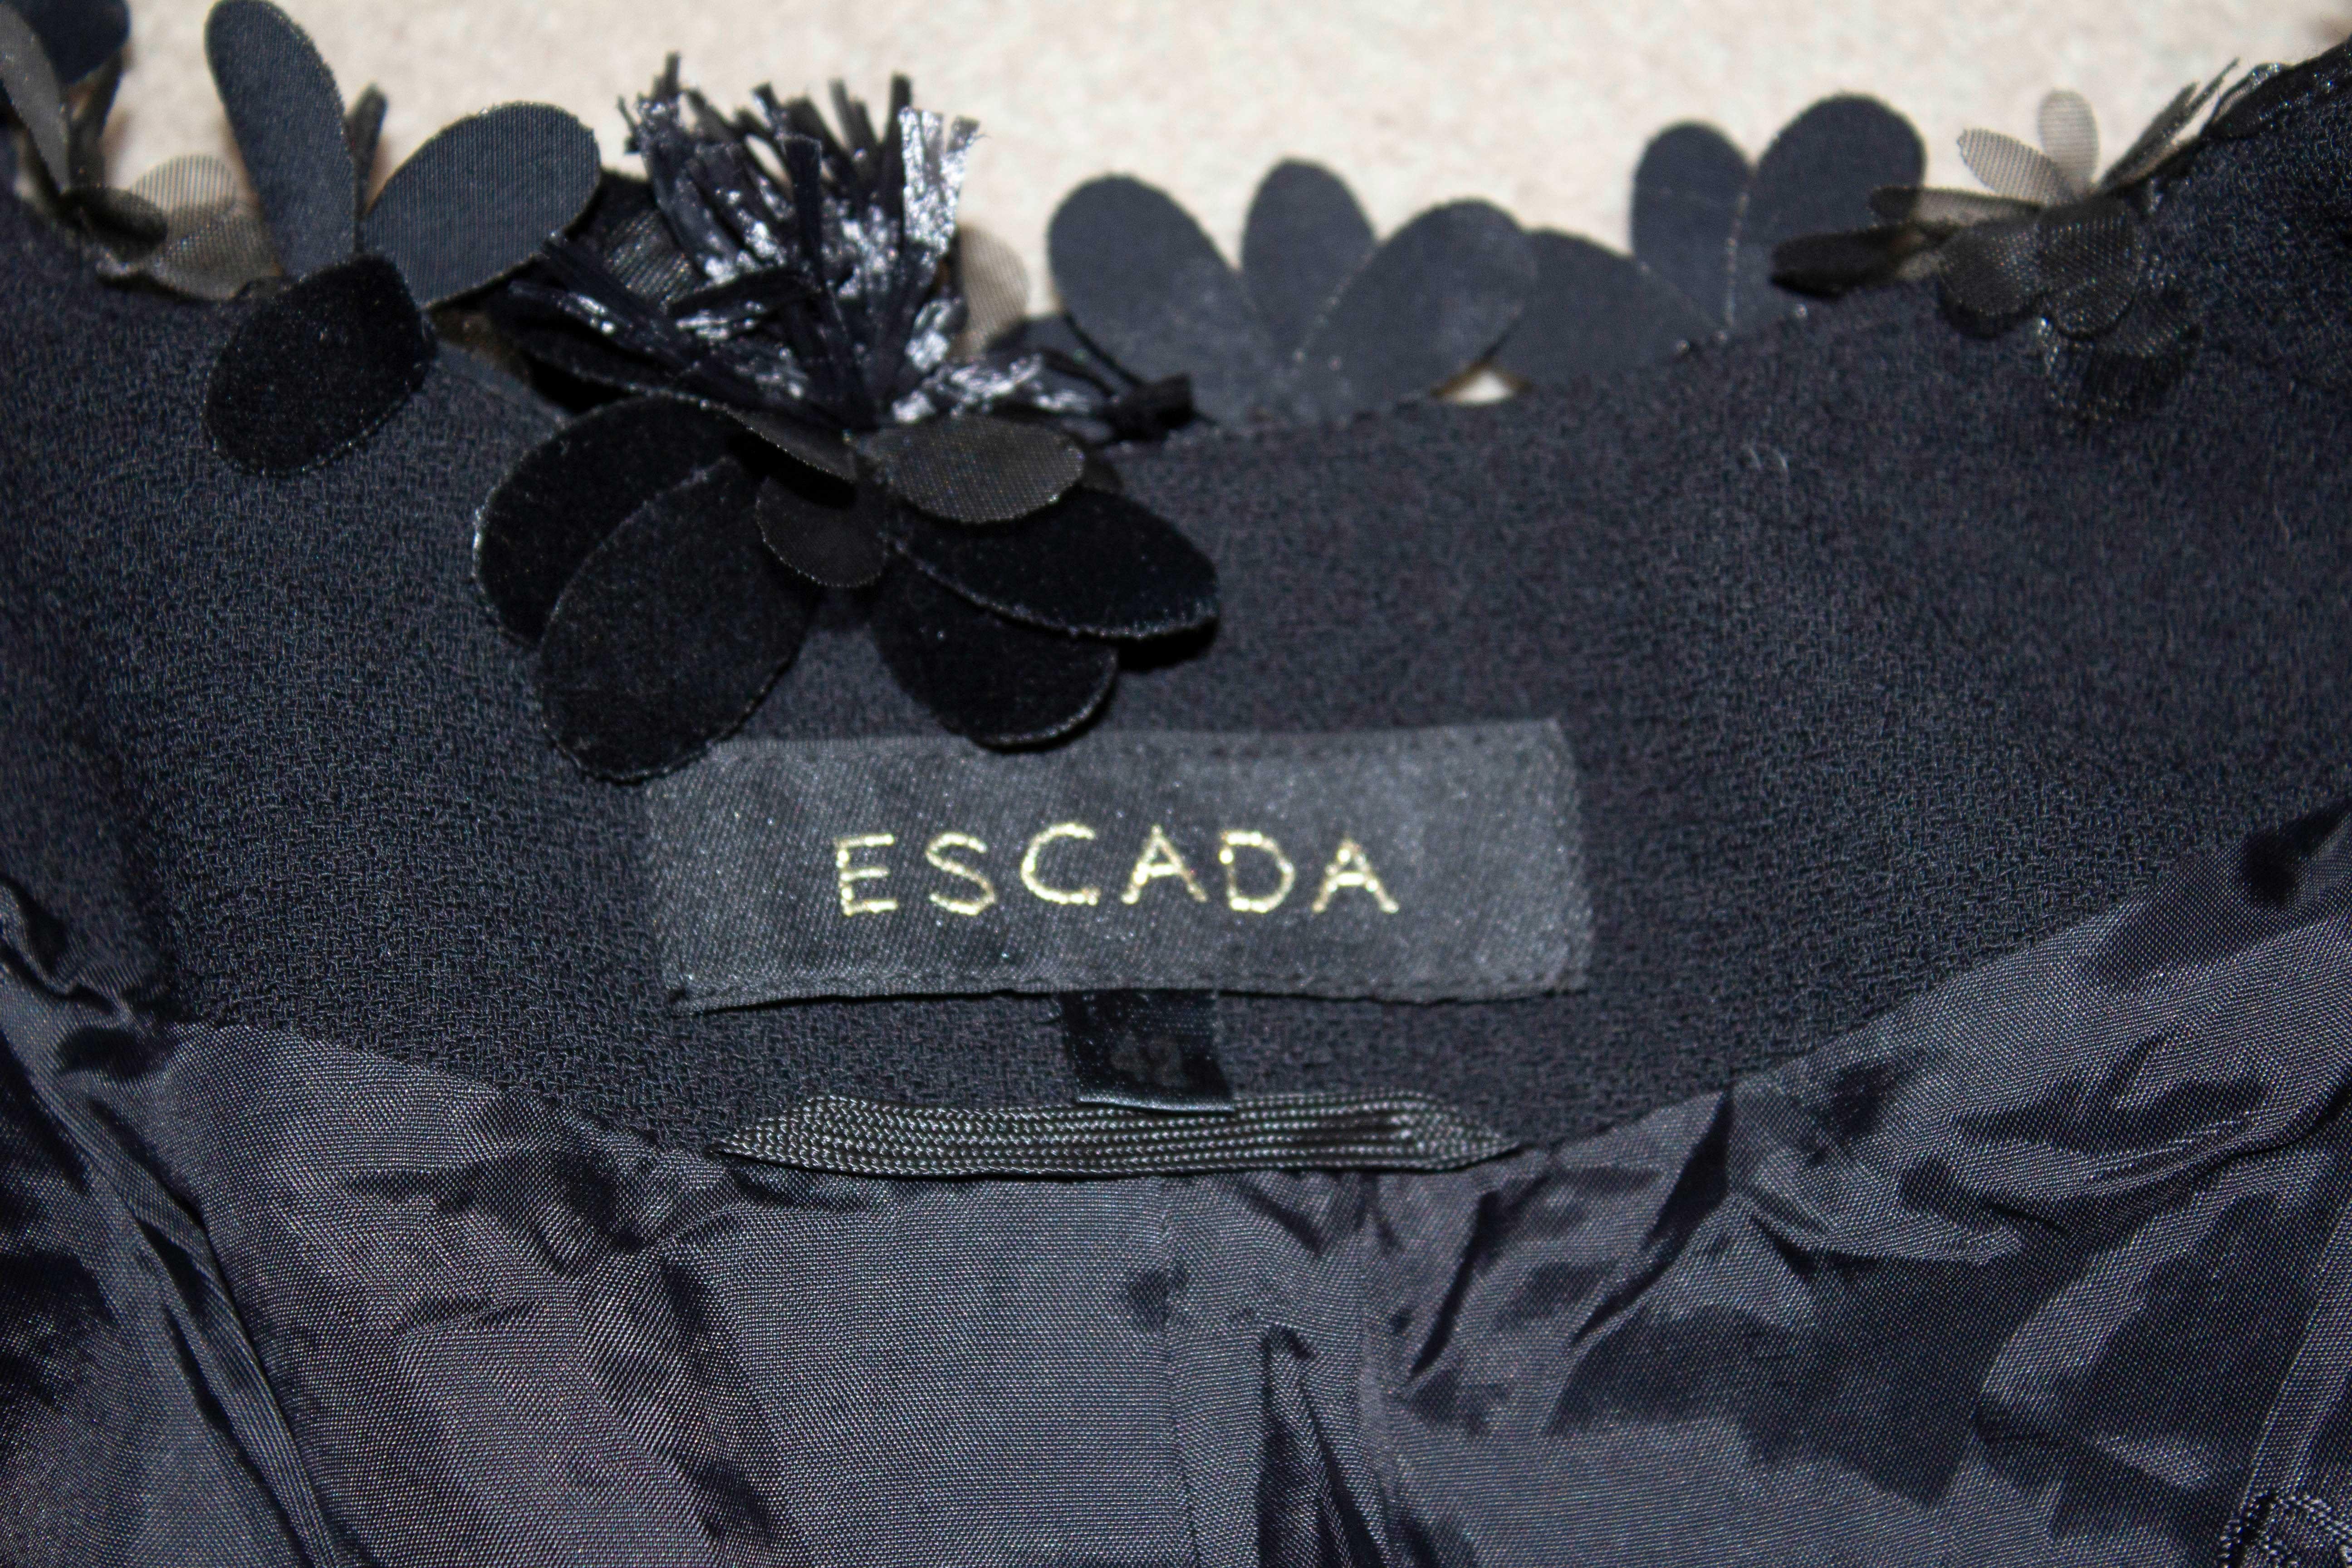 A stunning skirt suit in black wool by Escada. The jacket has a v neckline and fastens with 5 hooks and eyes, and is edged with a floral detail. It is fully lined. The  skirt is A line with flower frill detail, and is lined. Both size 42 .